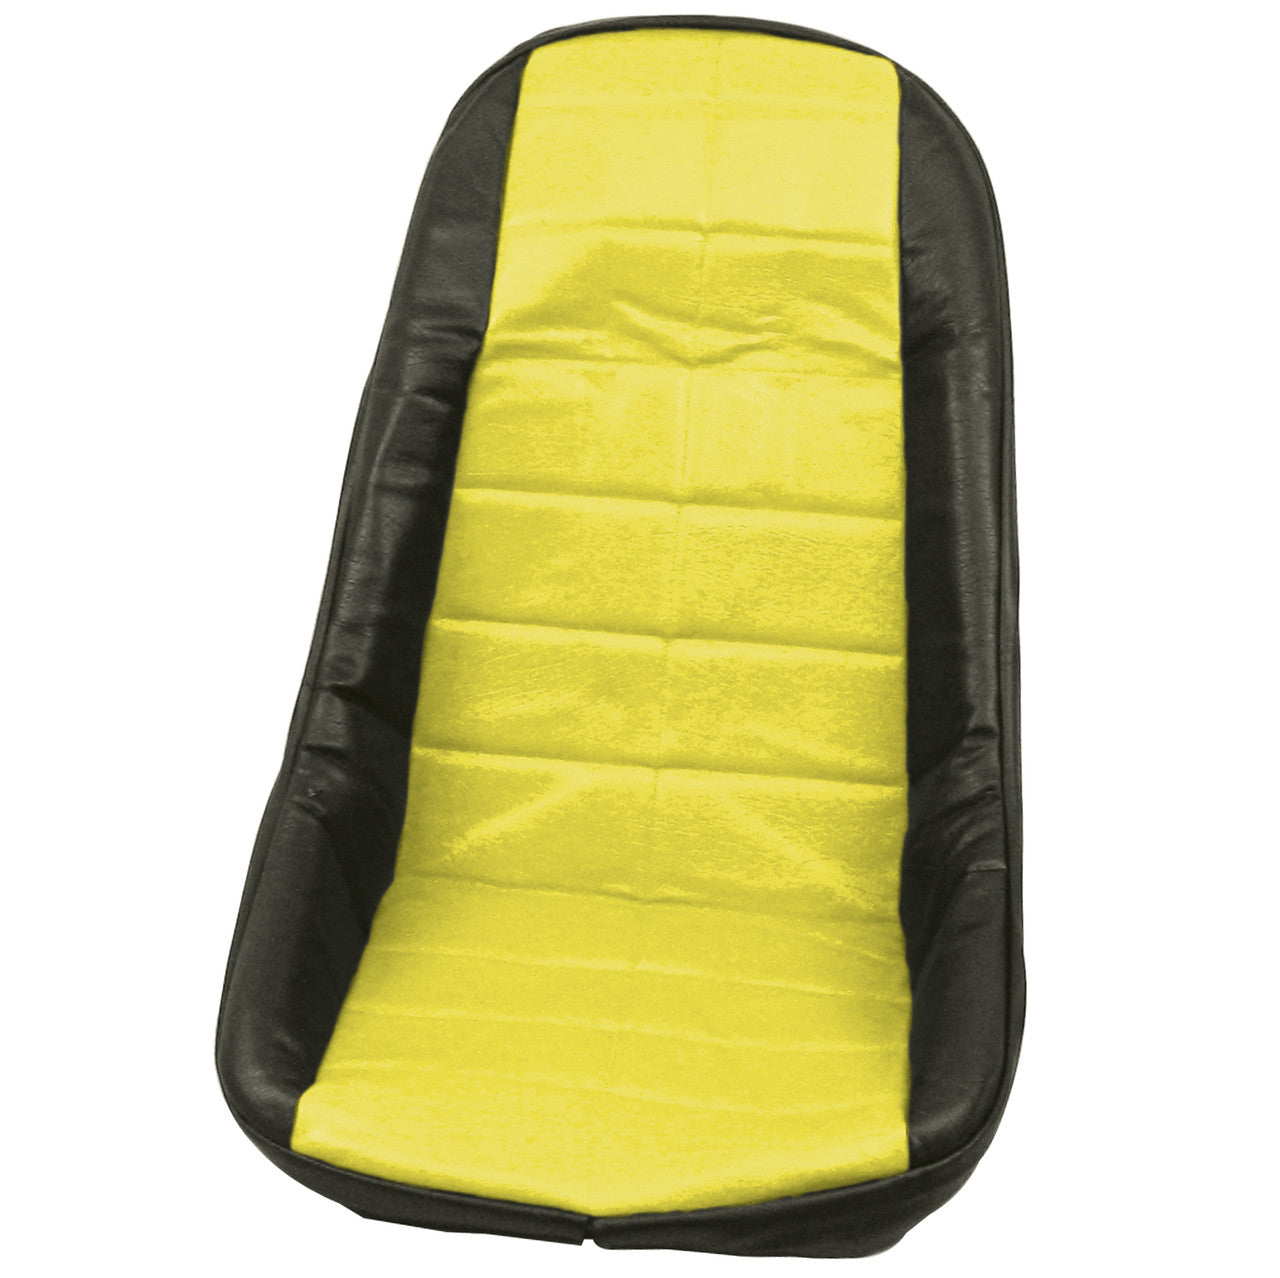 Empi 62-2610 Yellow Vinyl Low Back Bucket Seat Cover